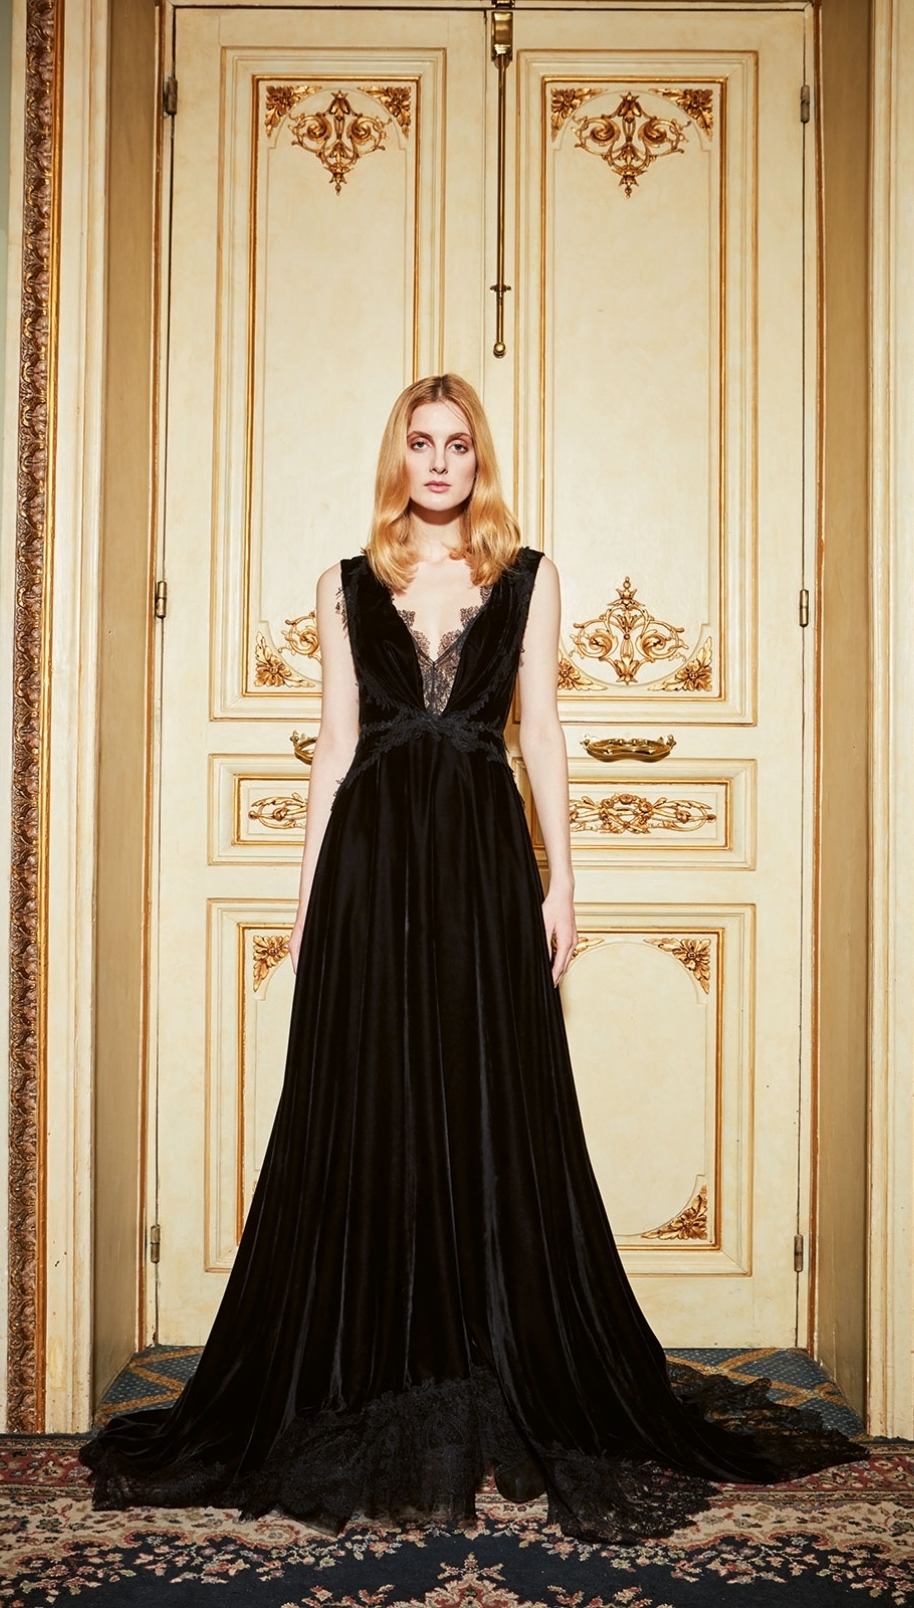 V-neckline gown with black silk lace